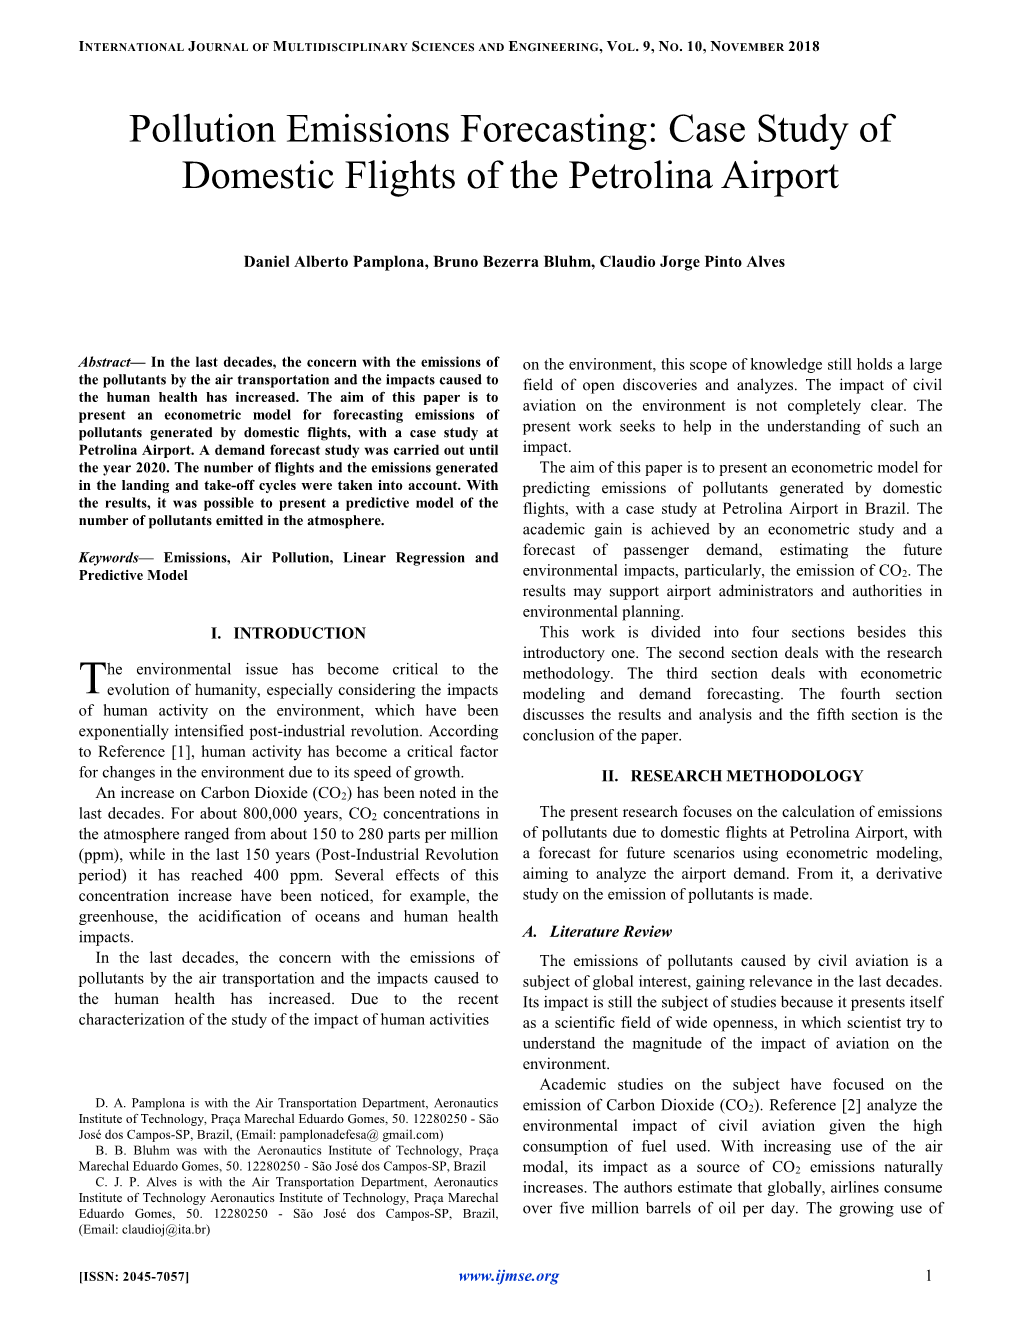 Pollution Emissions Forecasting: Case Study of Domestic Flights of the Petrolina Airport